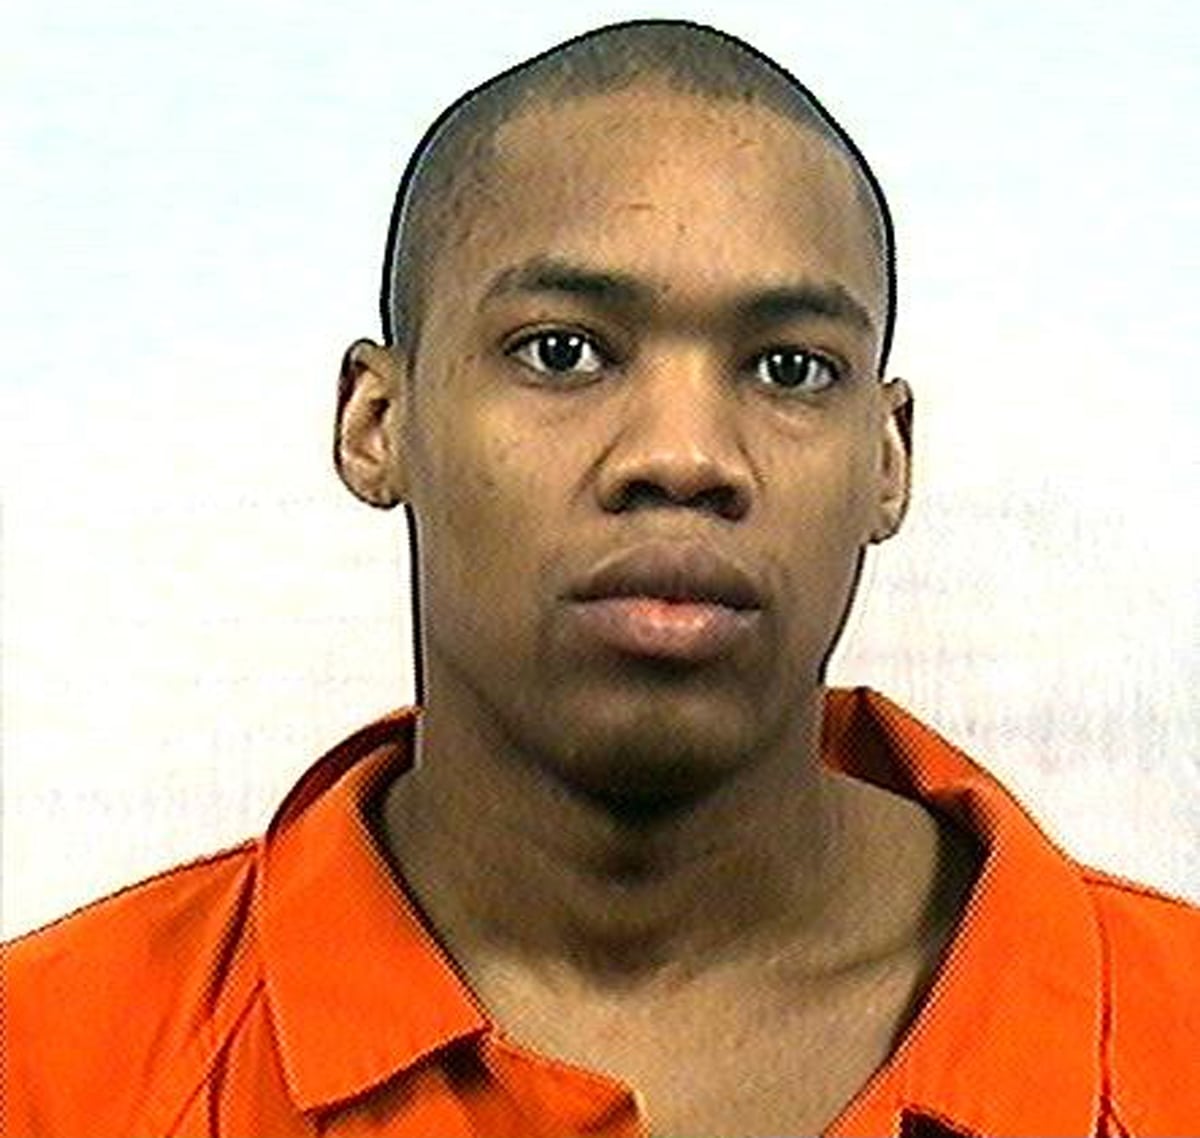 On November 18, 2021, Julius Jones's death sentence was dramatically commuted just hours before he was due to be executed after Kim Kardashian and other celebrities joined his family and supporters in pleading for his life